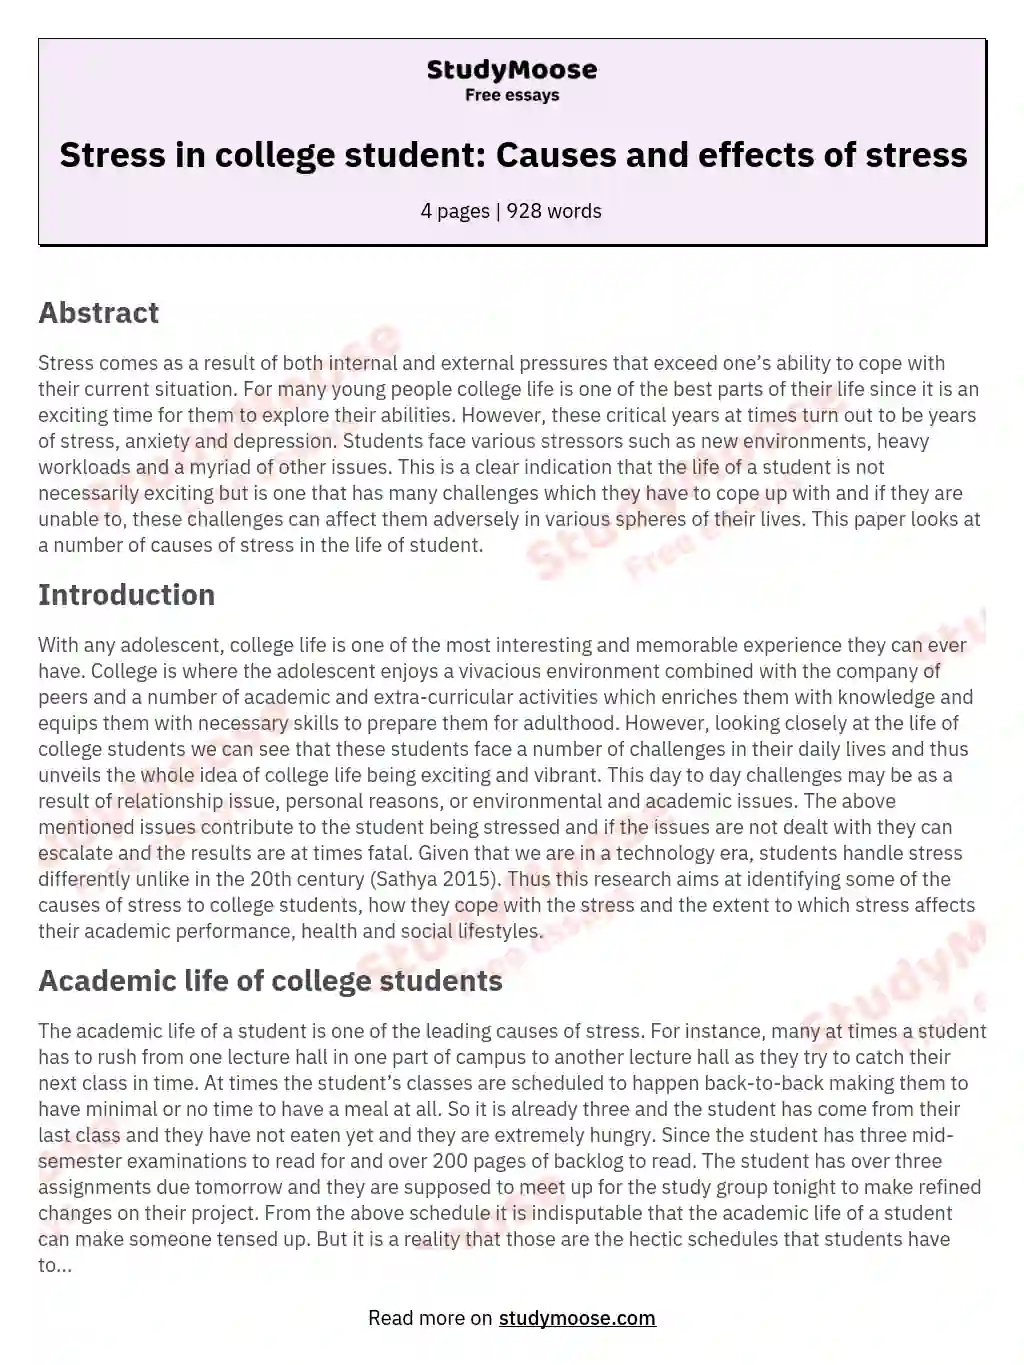 Stress in college student: Causes and effects of stress